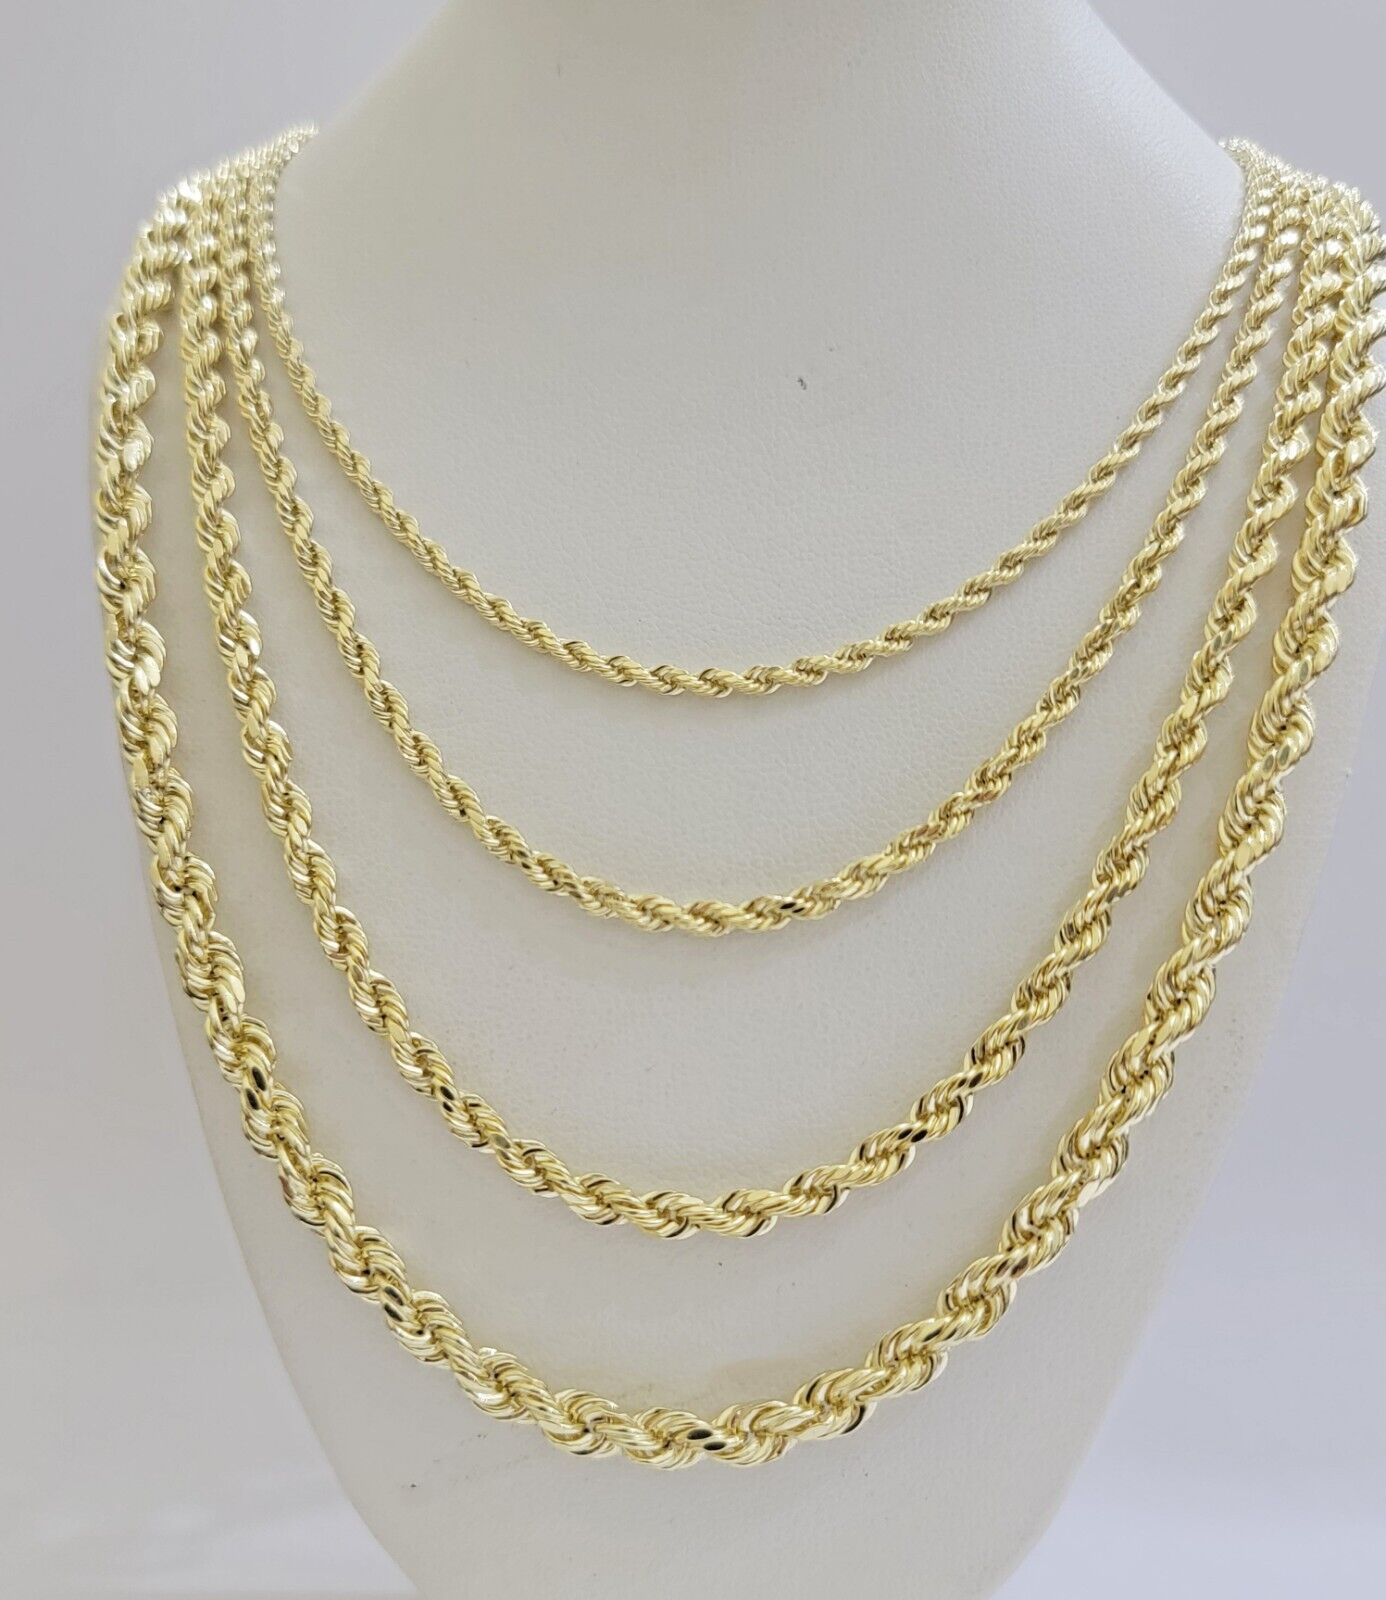 Real 14K Yellow Gold Rope Chain Necklace 2.5mm 3mm 4mm 5mm 18-26 inch Men Women 3mm / 20inch